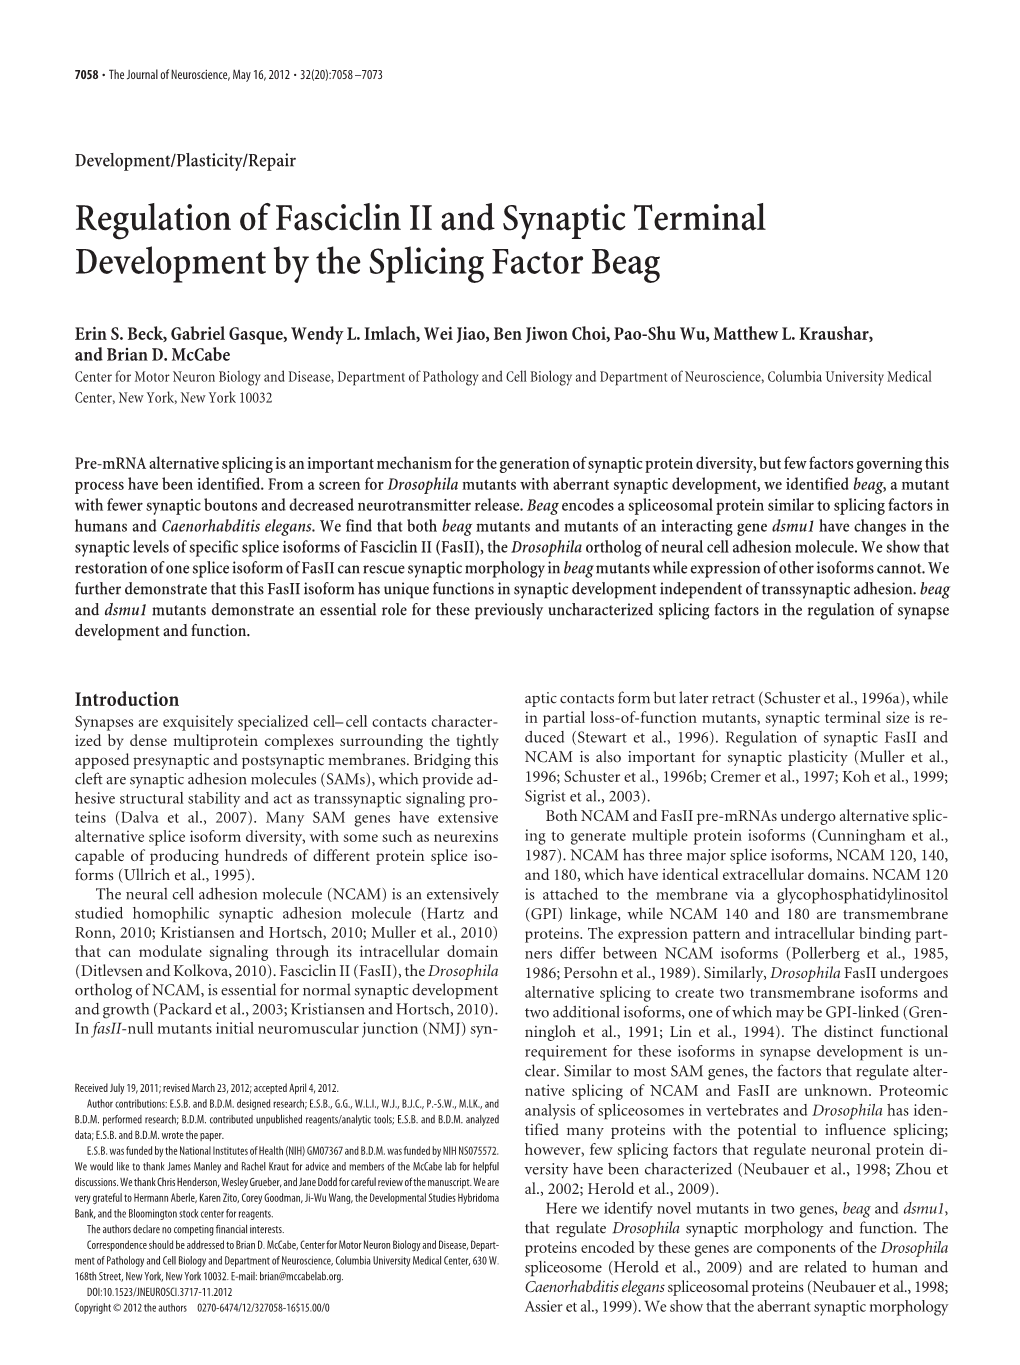 Regulation of Fasciclin II and Synaptic Terminal Development by the Splicing Factor Beag